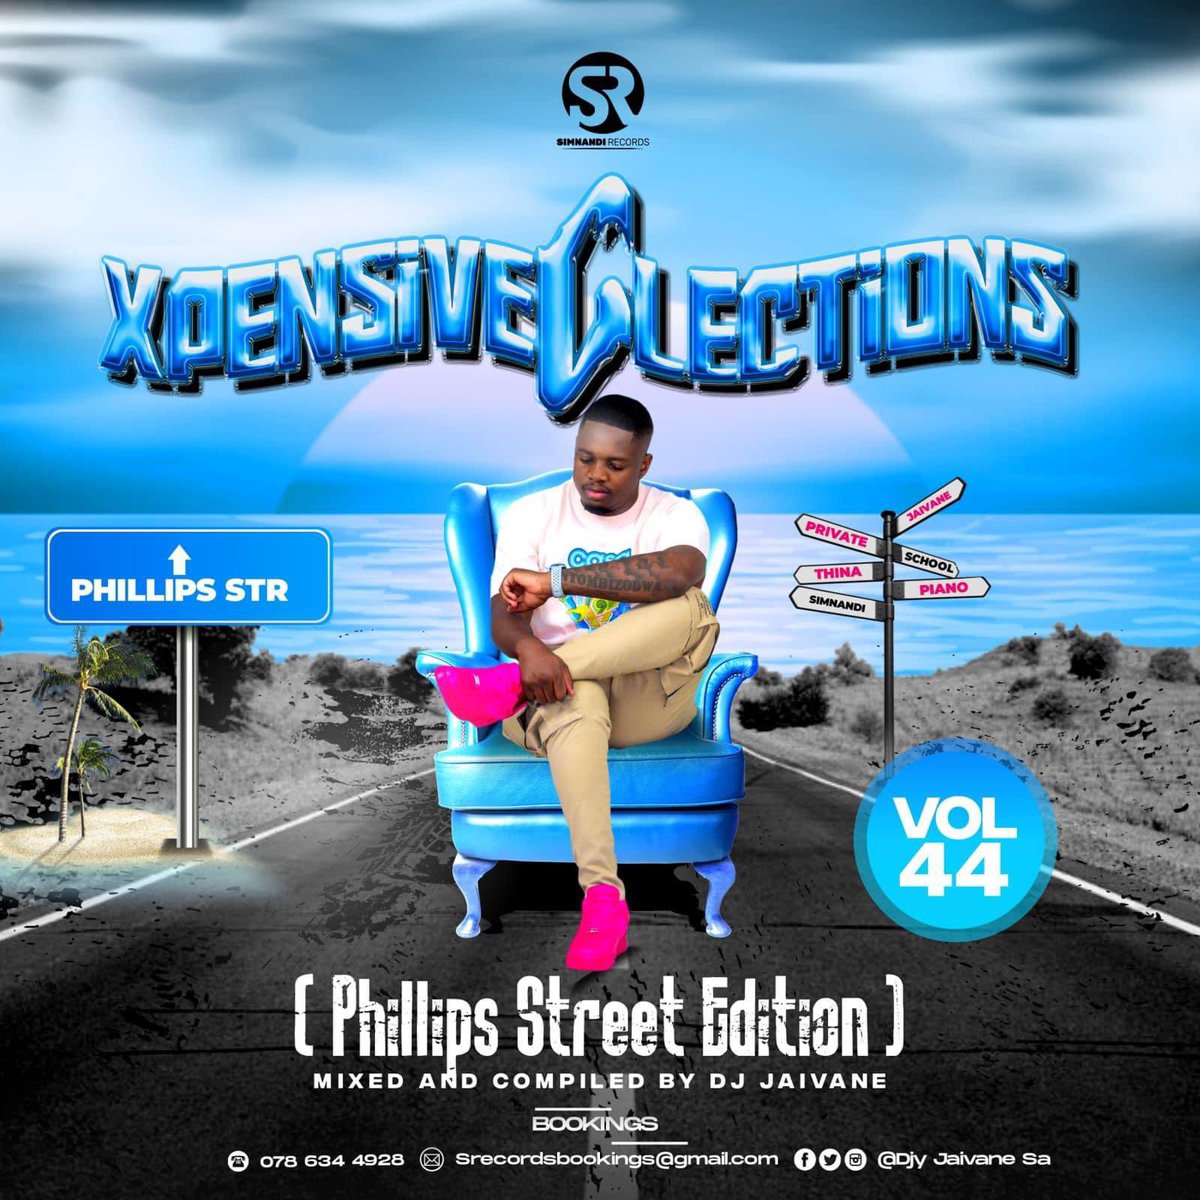 Phillips Street Edition 🔥🚨 Link 1 iPhone Users: podcasts.apple.com/us/podcast/djy… Link 2 Android Users: hearthis.at/djy-jaivane/xp… Link 3 YouTube: youtu.be/vid0YEuQsHQ #OwnLaneBoy🛣️🐘 #XCVol44_PhillipsStreetEdition🔥